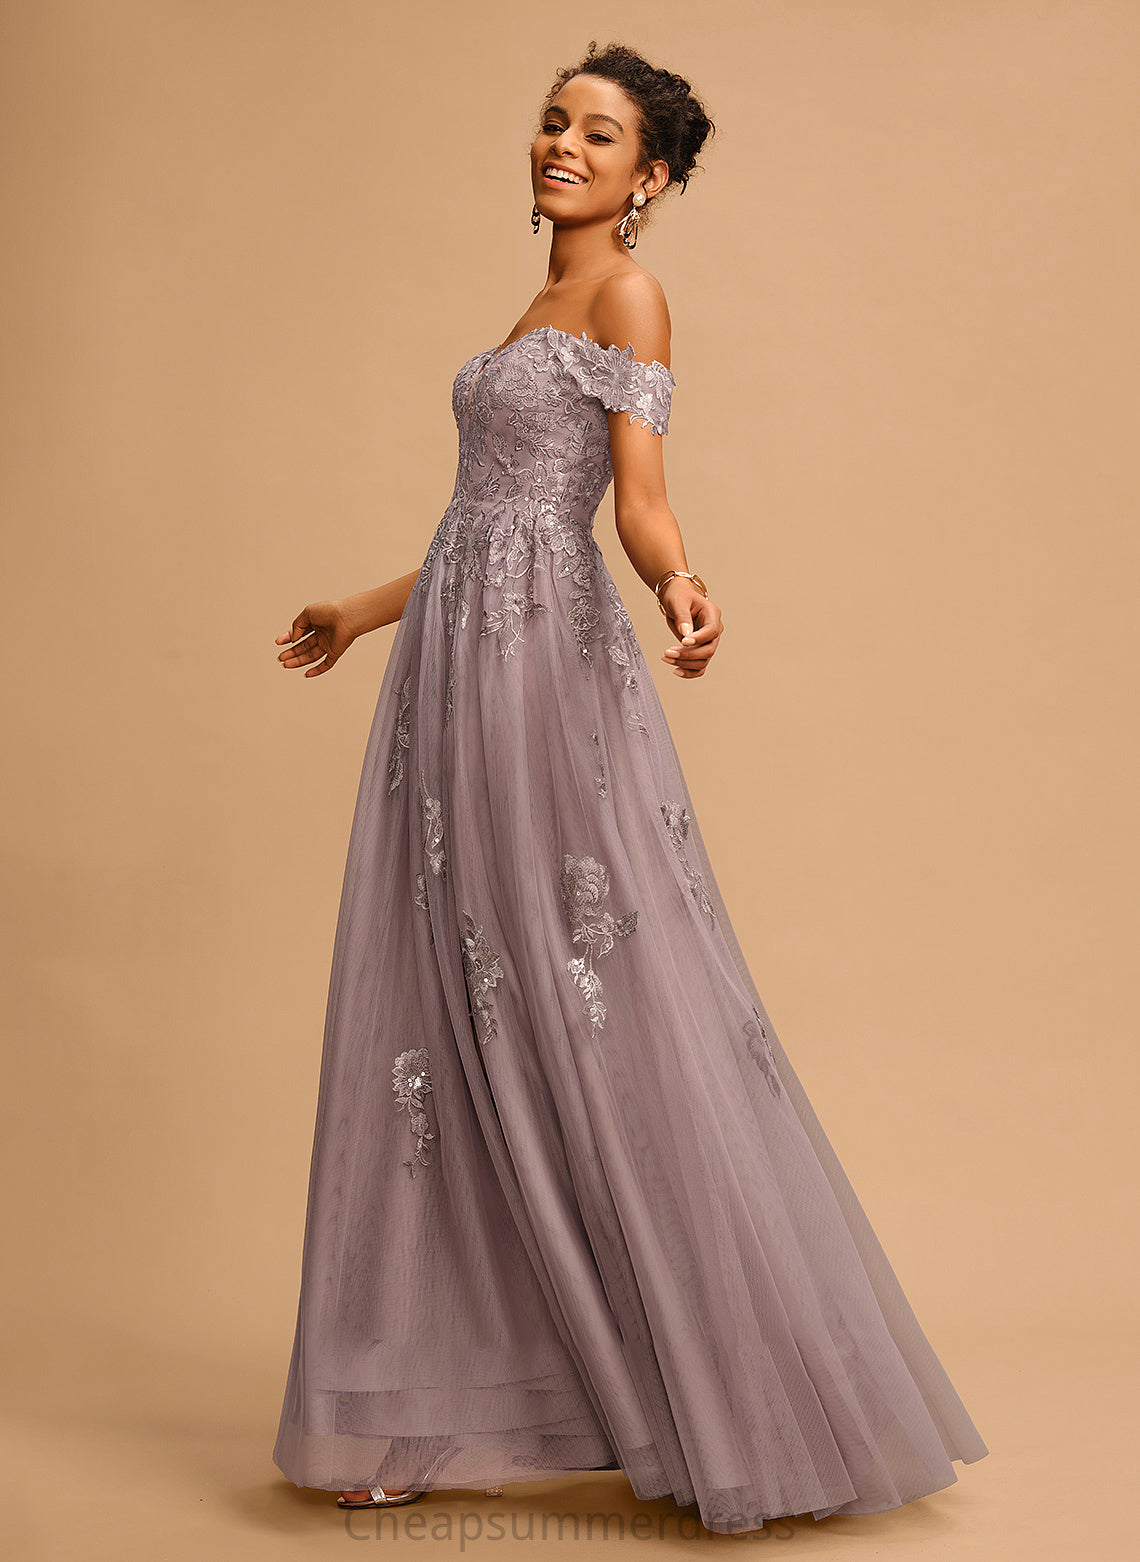 A-Line Tulle Prom Dresses With Off-the-Shoulder Aniya Sequins Floor-Length